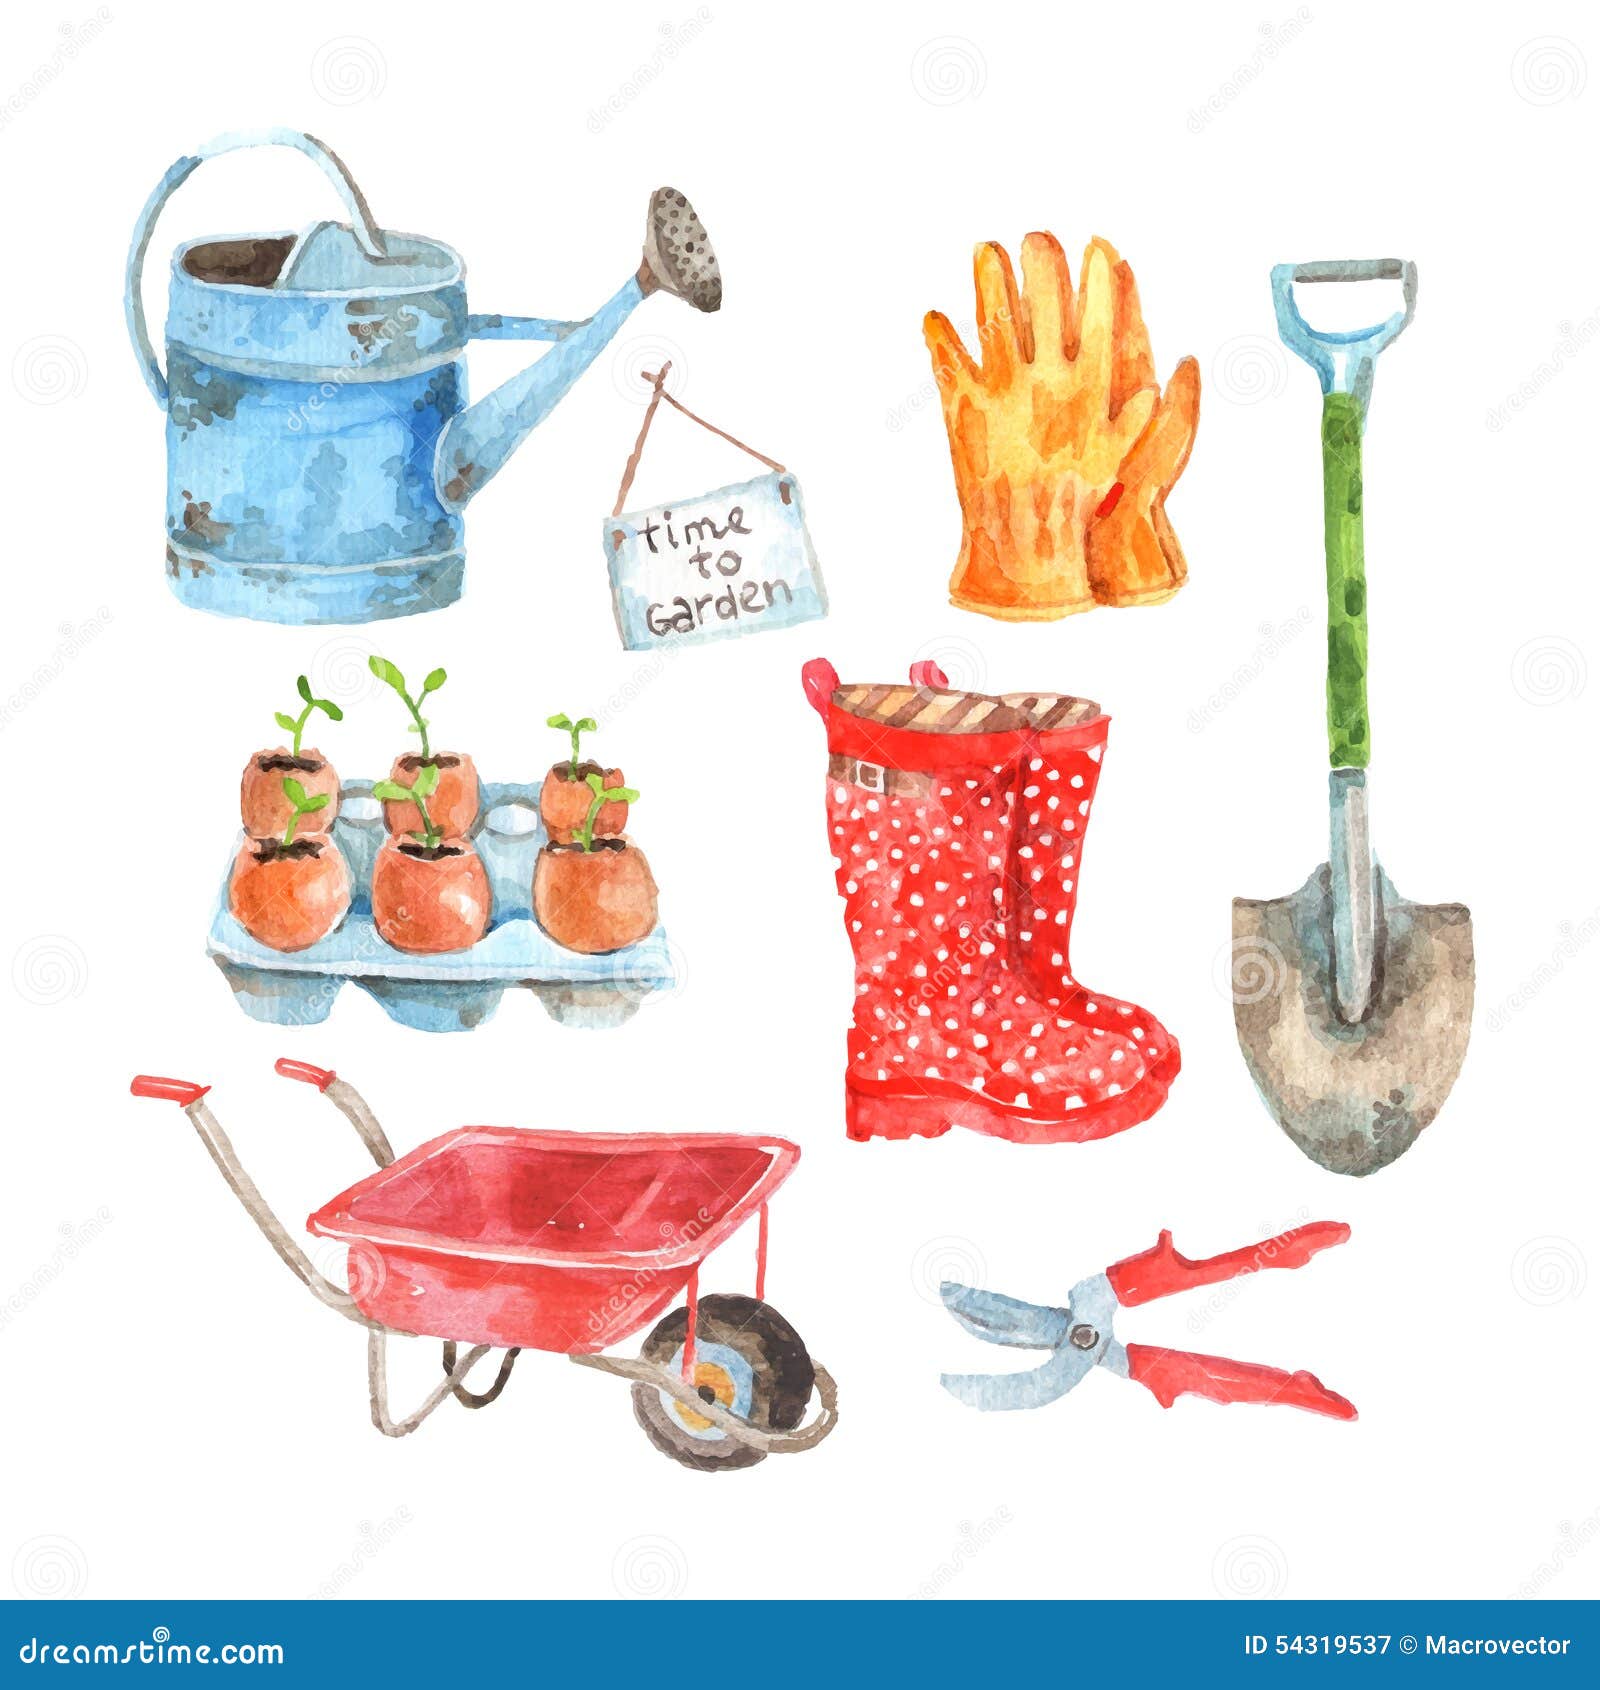 gardening watercolor pictograms collection set